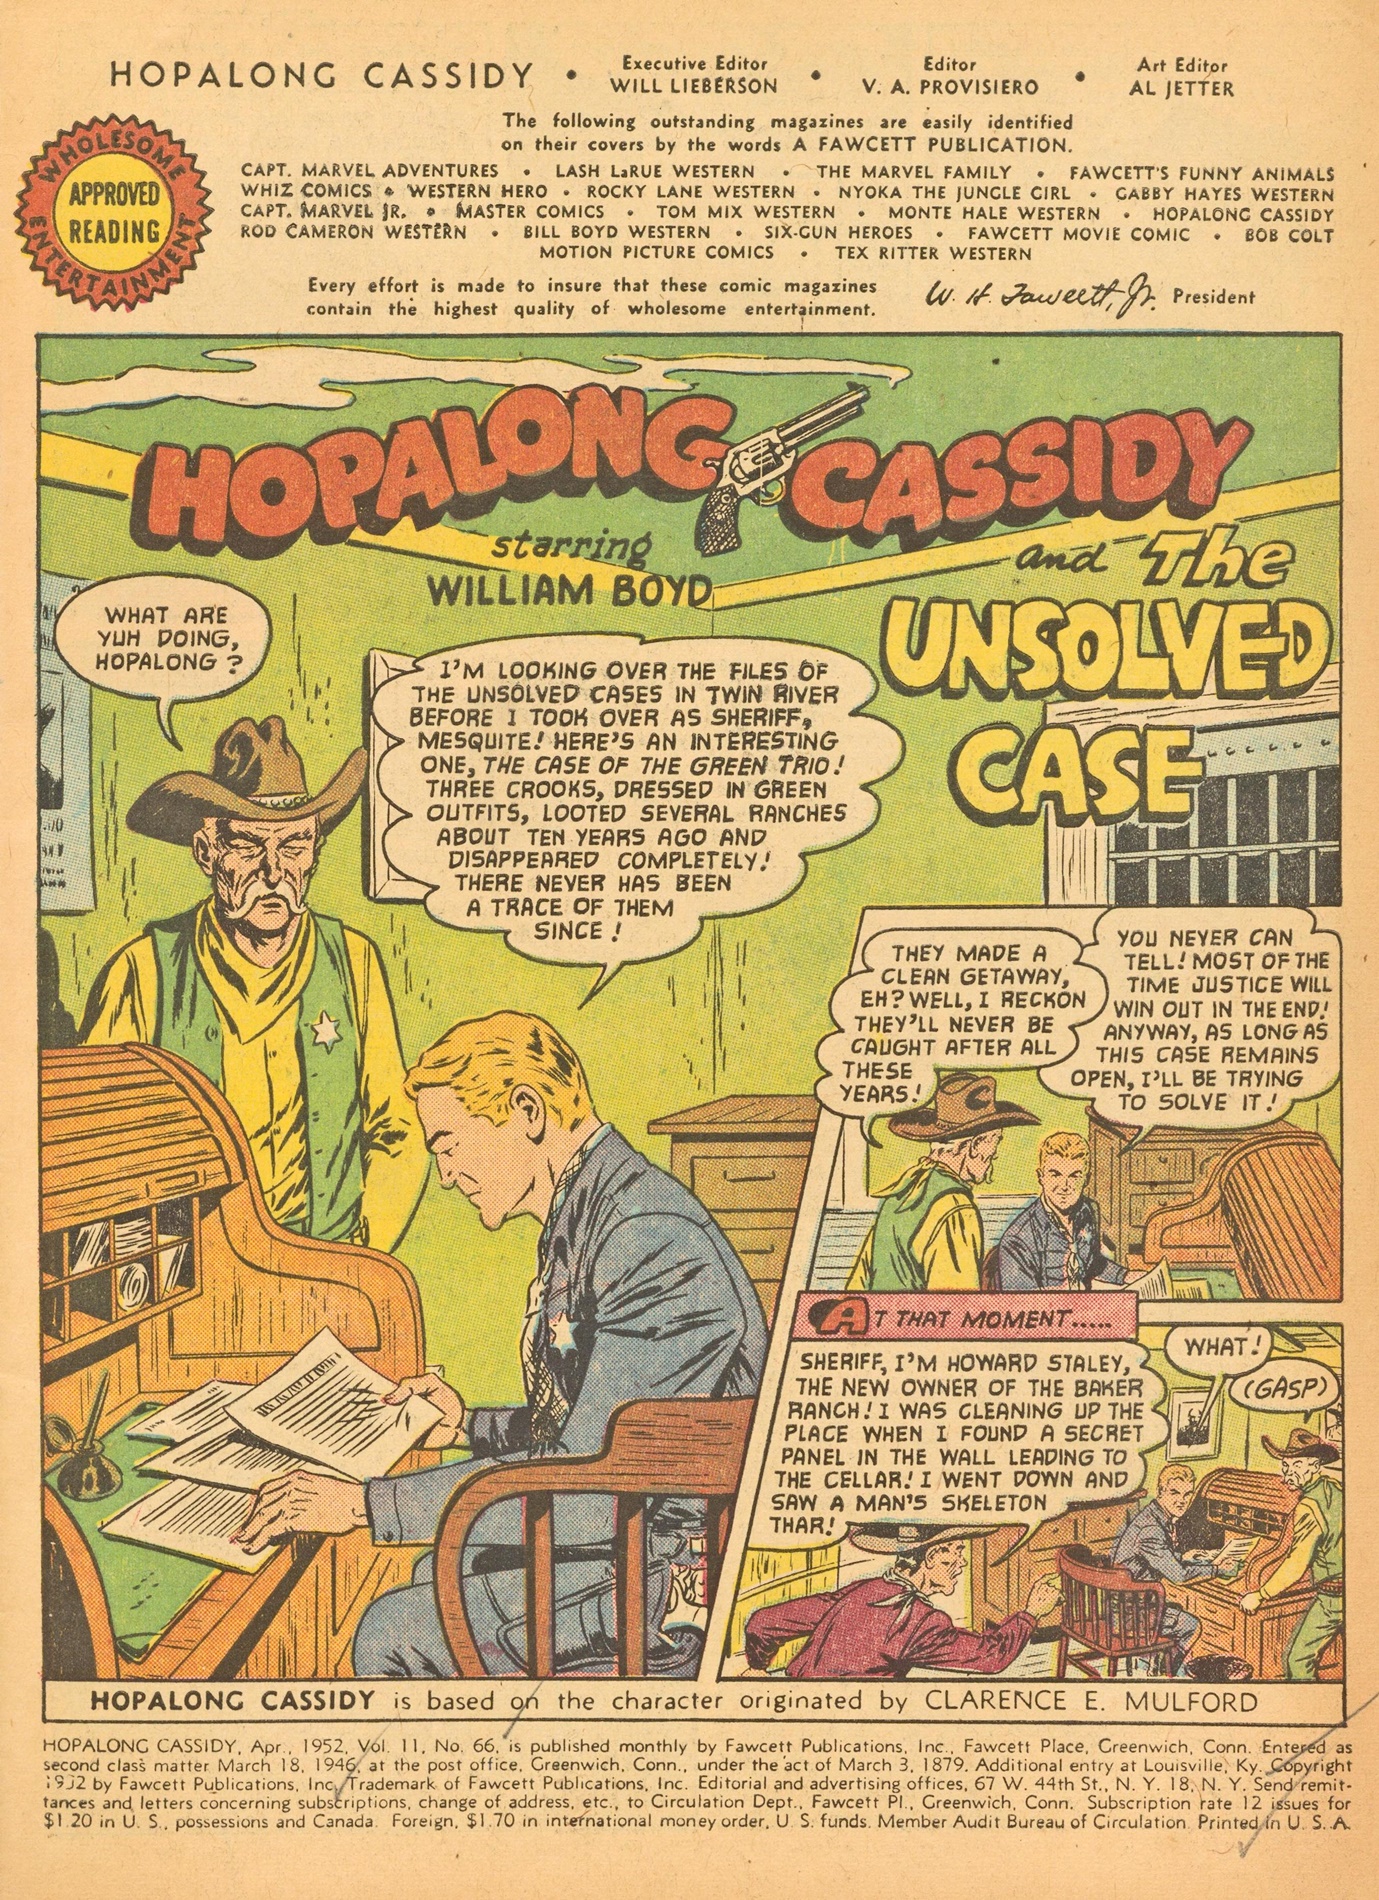 Read online Hopalong Cassidy comic -  Issue #66 - 3